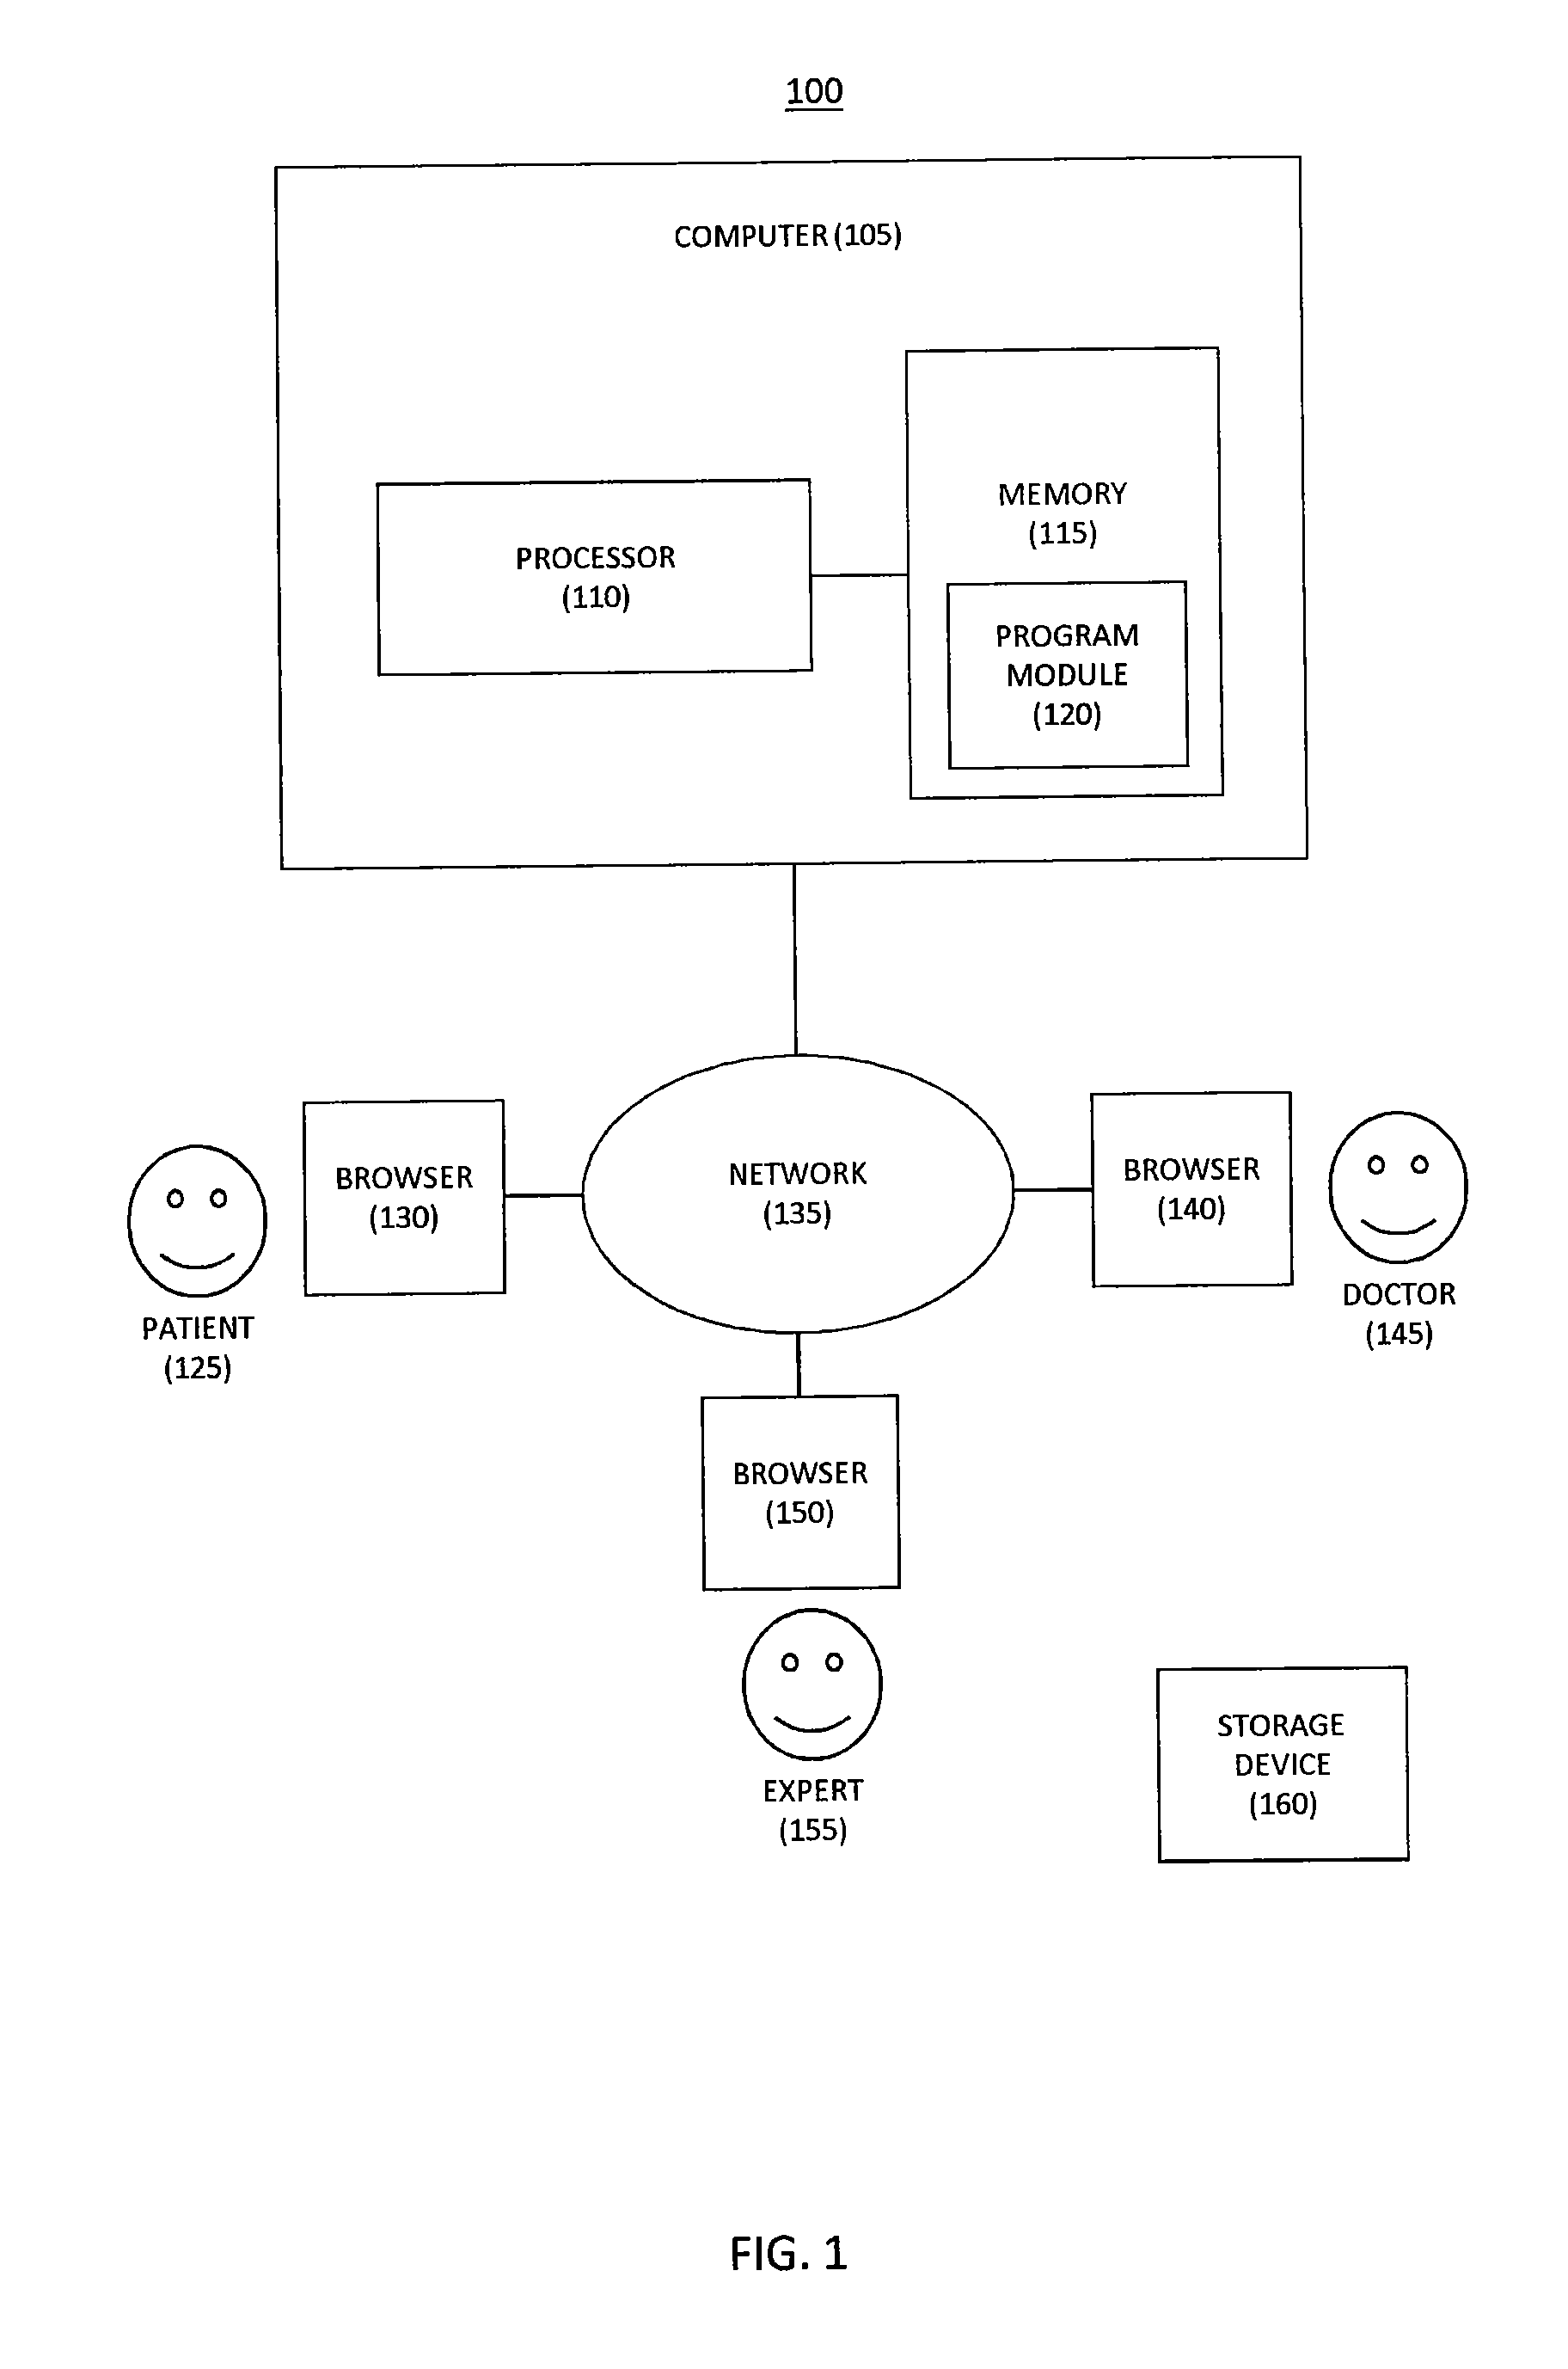 System and method for matching person-specific data with evidence resulting in recommended actions